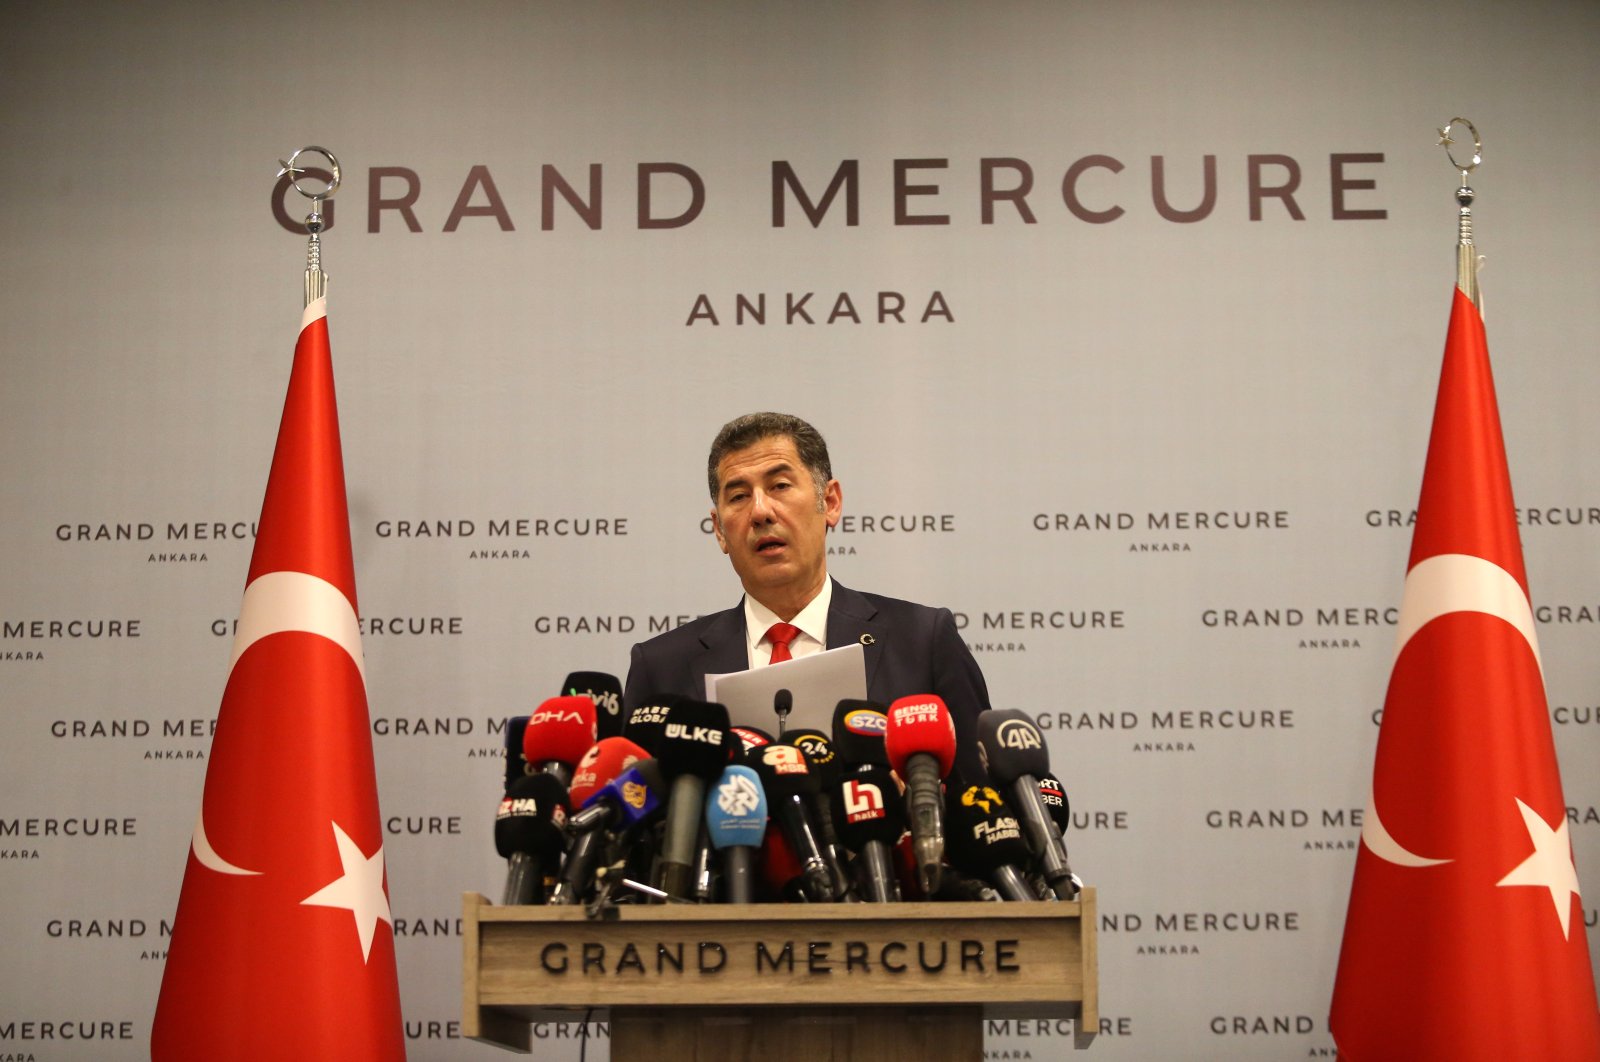 Former presidential candidate of the ATA Alliance, Sinan Oğan, speaks during a news conference in Ankara on May 22, 2023.